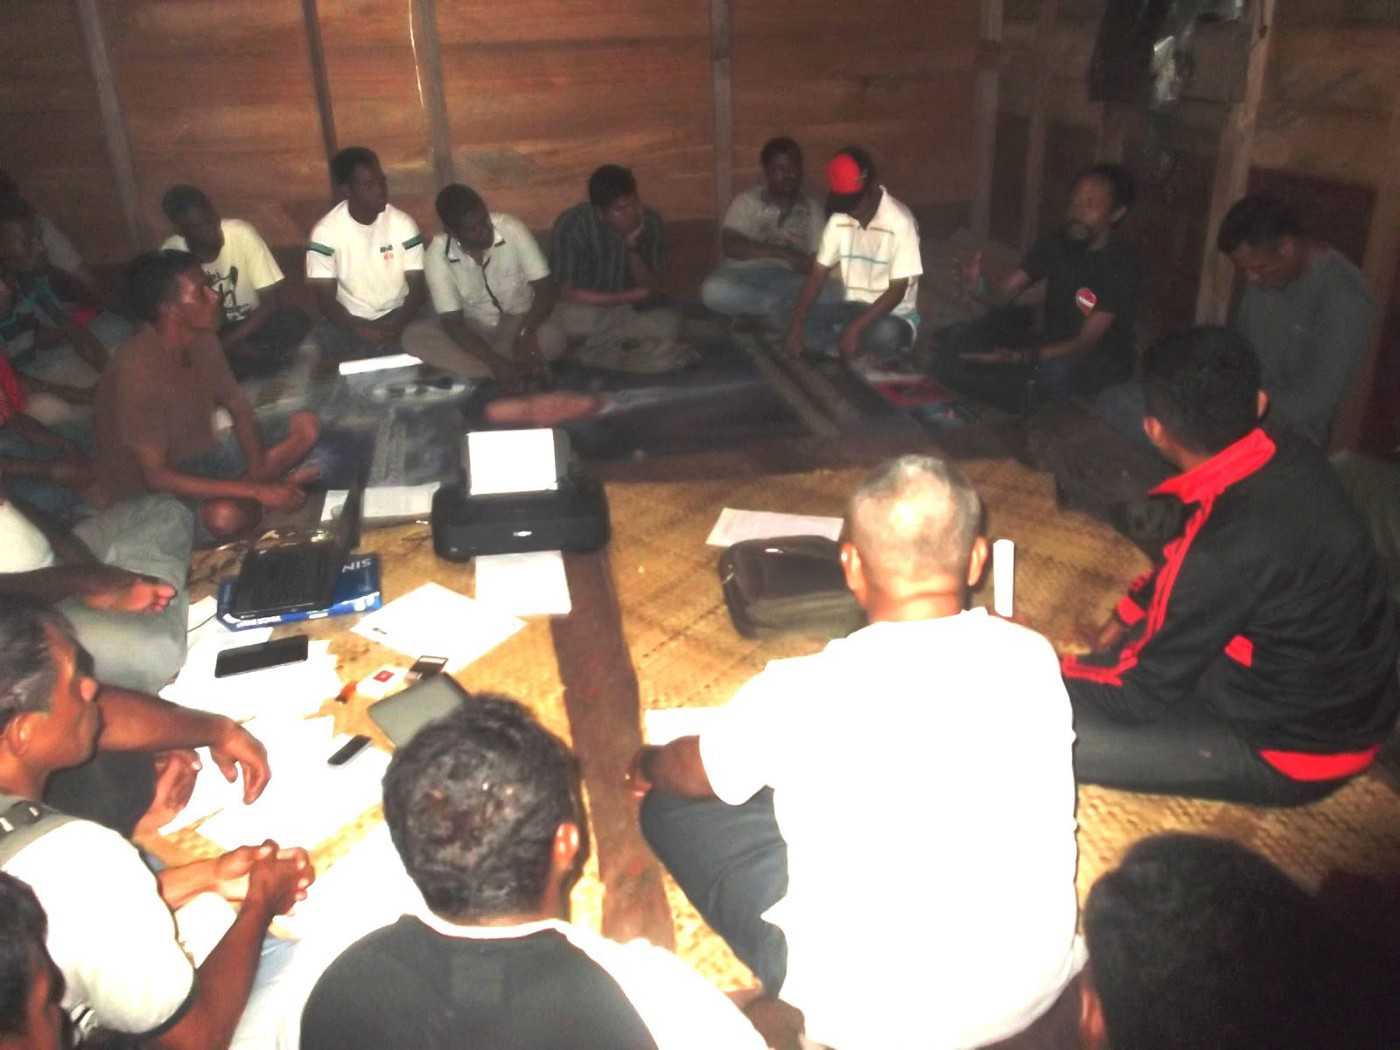 Rudi, right, sits with local activists at the ‘Hyacinth Post’ in Dobo in 2013.